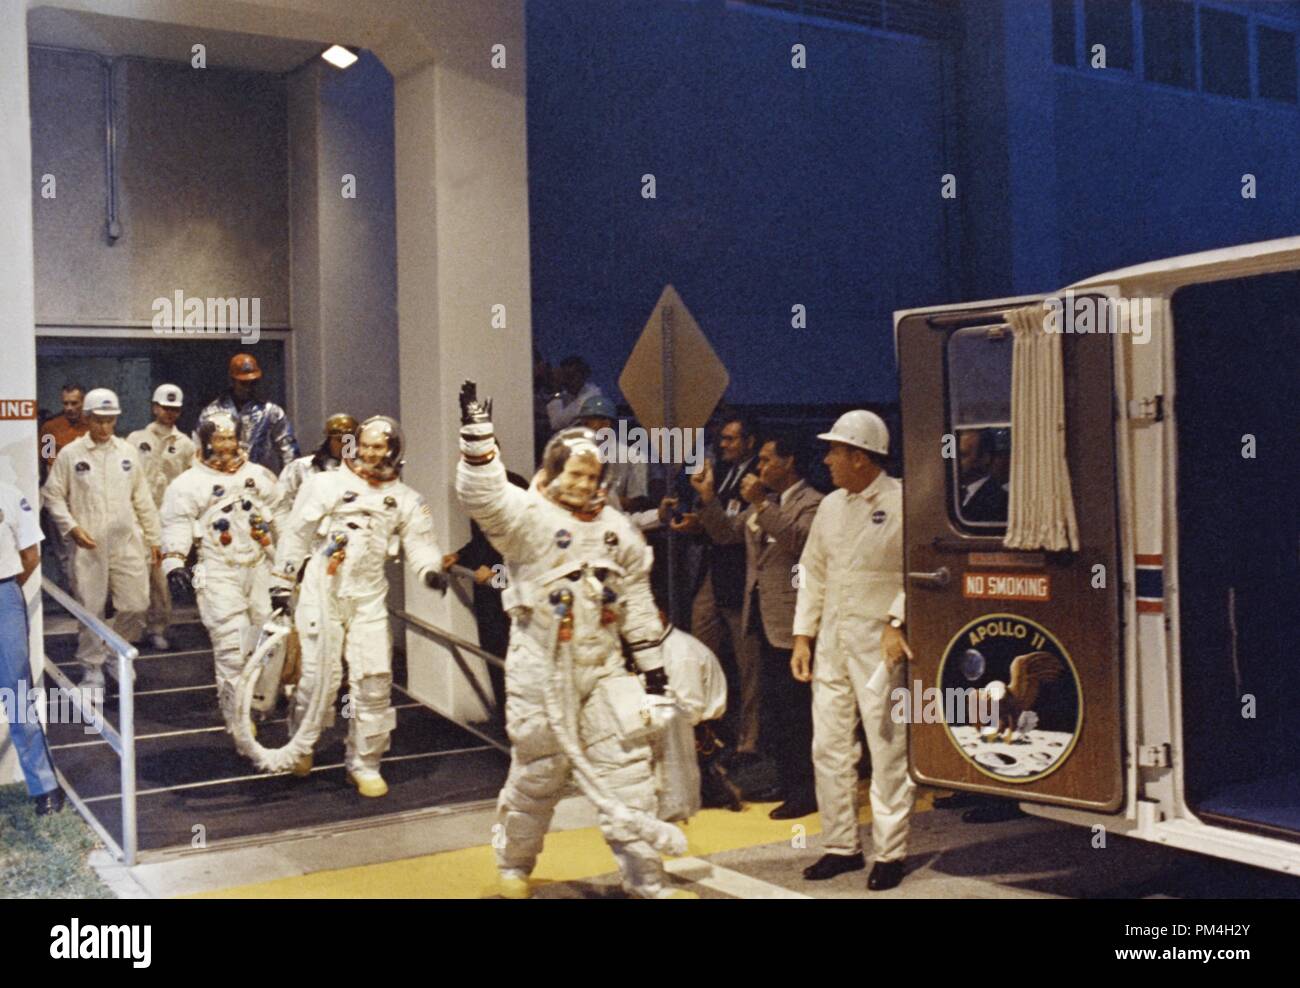 Apollo 11 Commander Neil A. Armstrong leads astronauts Michael Collins and Edwin E. Aldrin, Jr., from the Manned Spacecraft Operations Building to the transfer van for the eight-mile trip to Pad 39A. July 16, 1969  File Reference # 1003 198THA Stock Photo